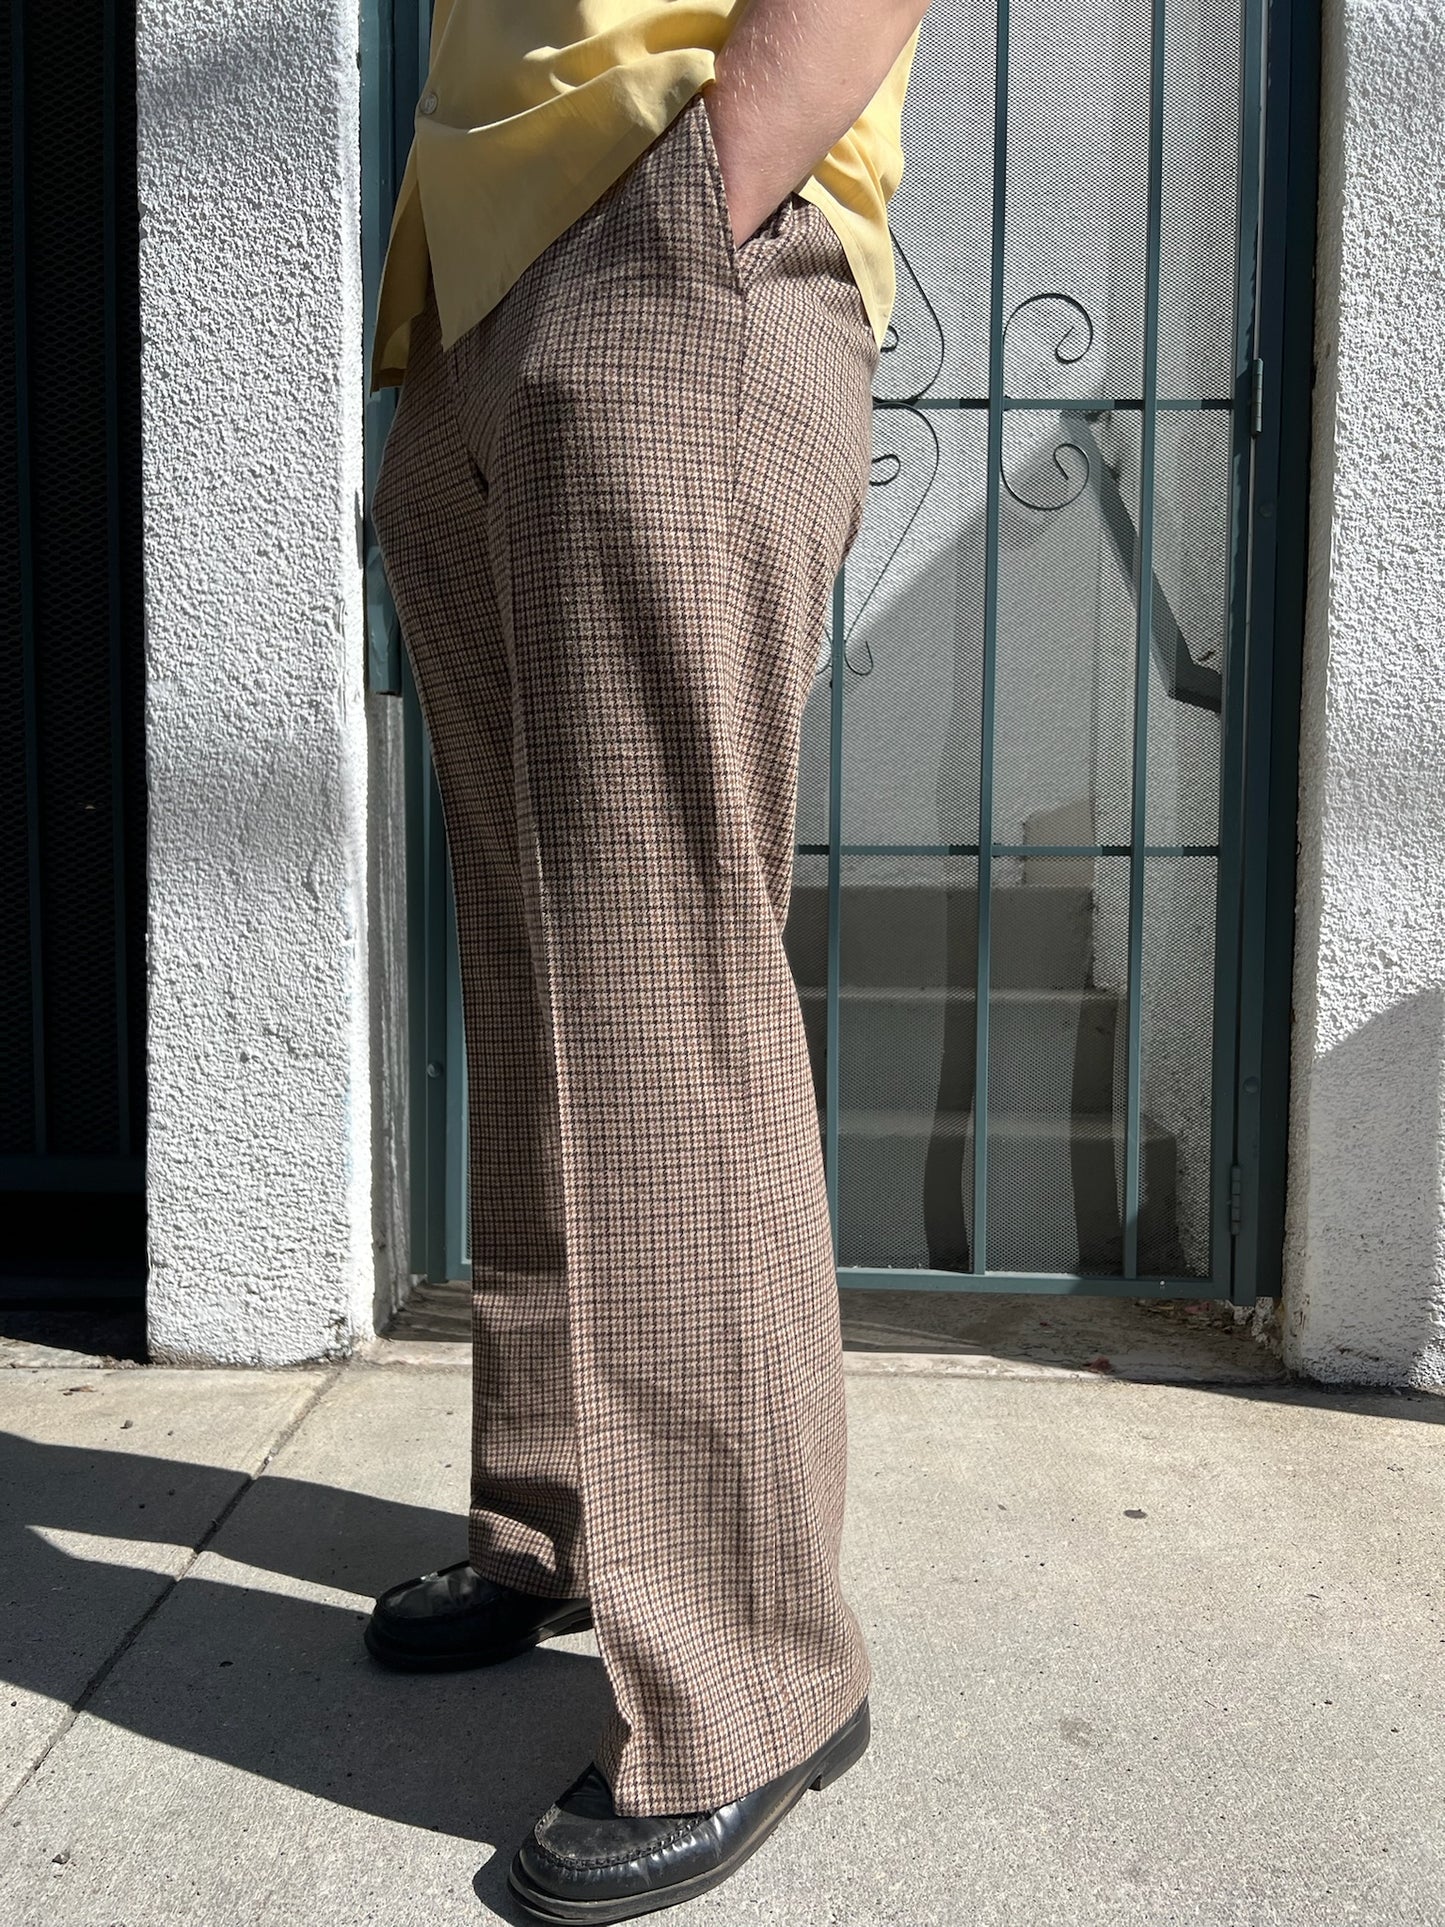 70s Sears Roebuck and Co houndstooth trousers